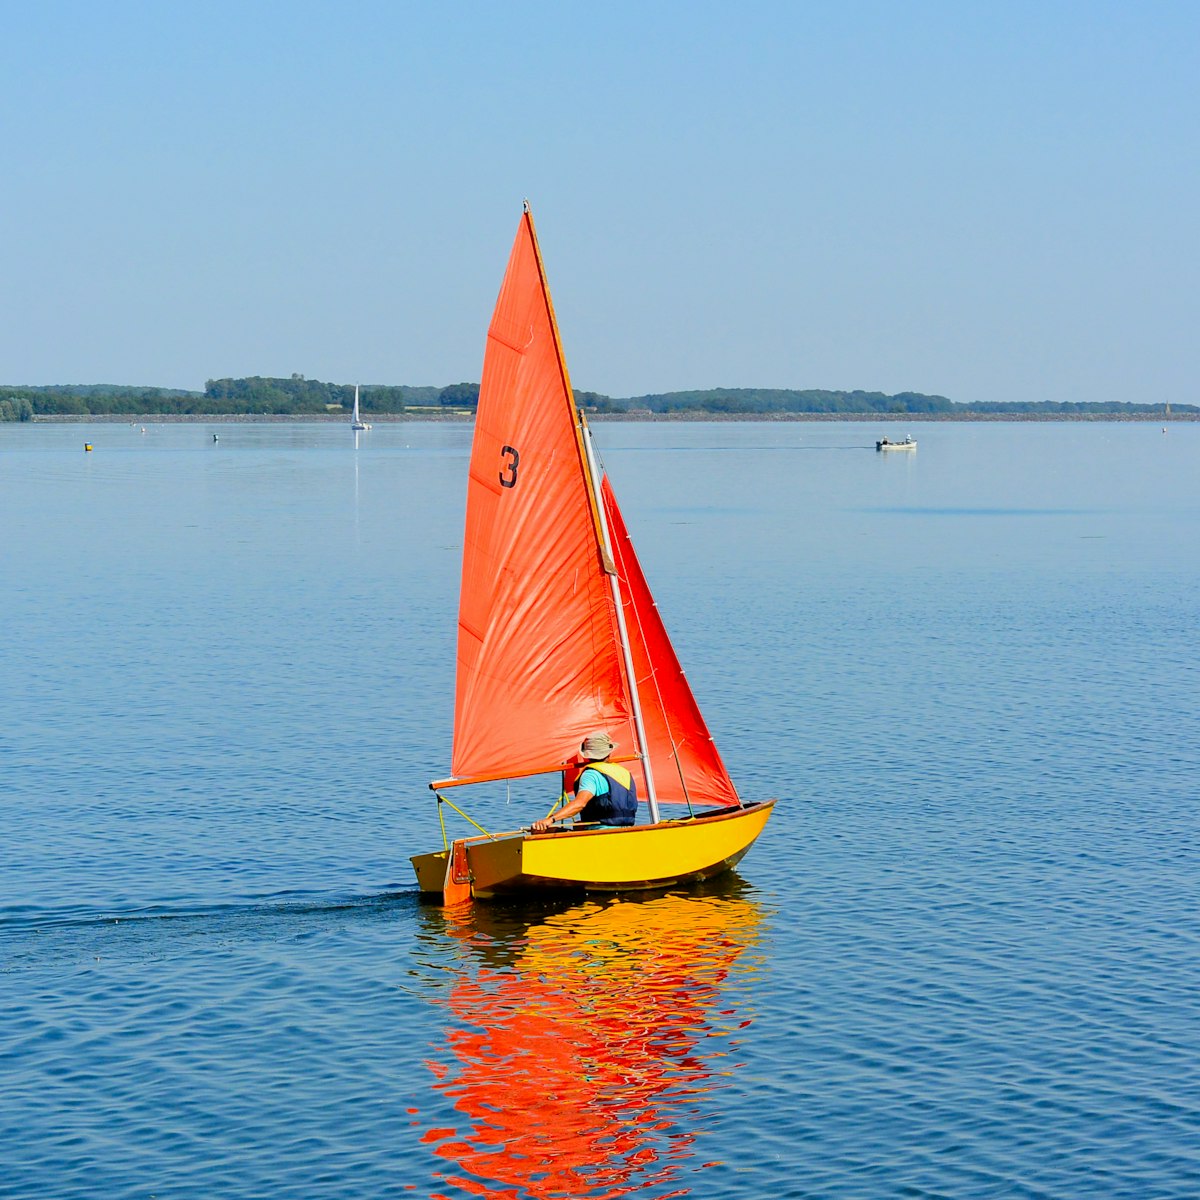 The ultimate guide to dinghies and sailboats